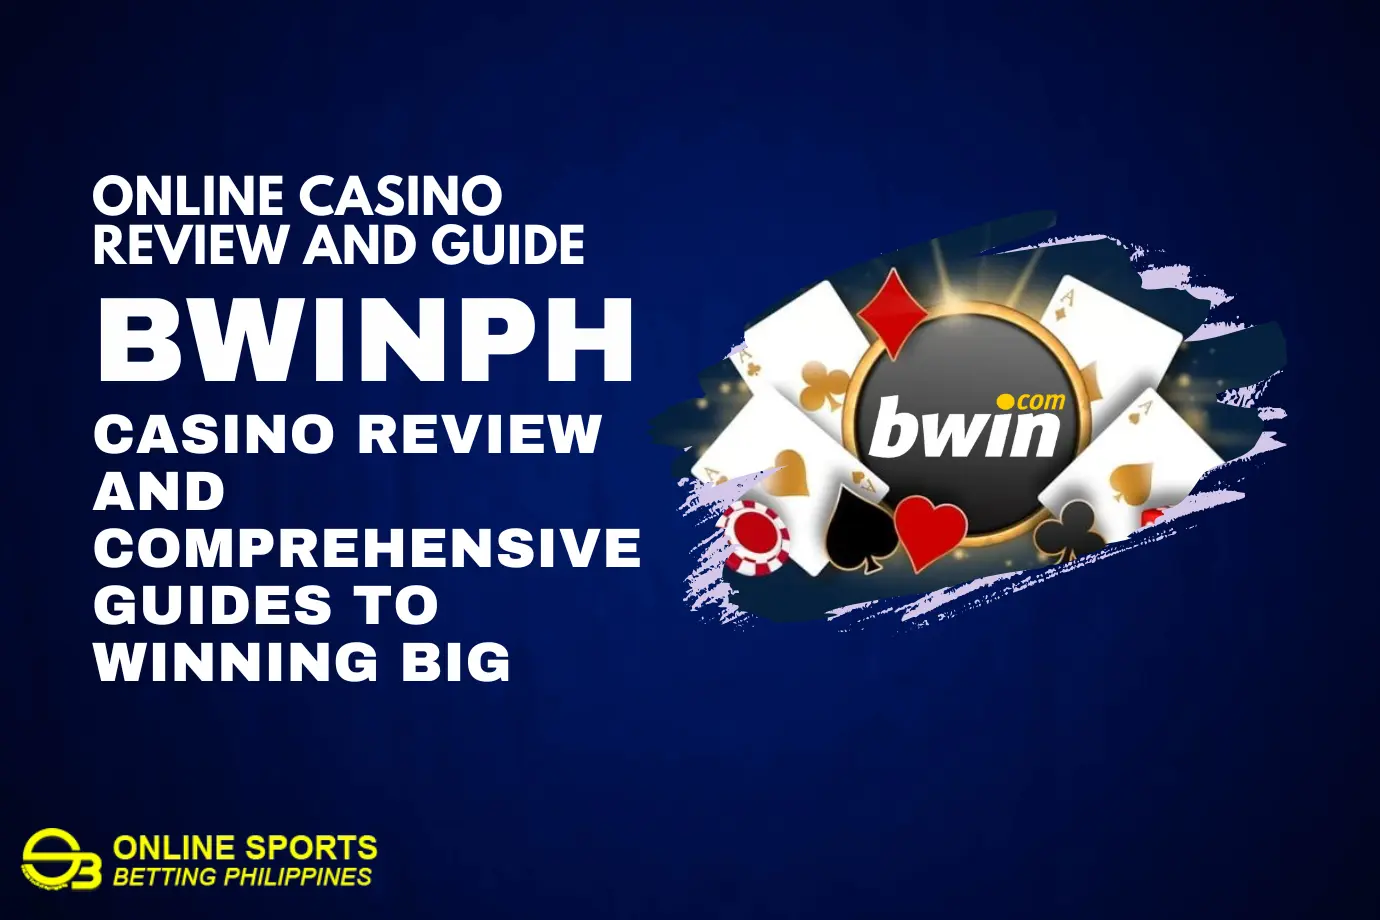 Bwinph: Casino Review and Comprehensive Guides to Winning Big